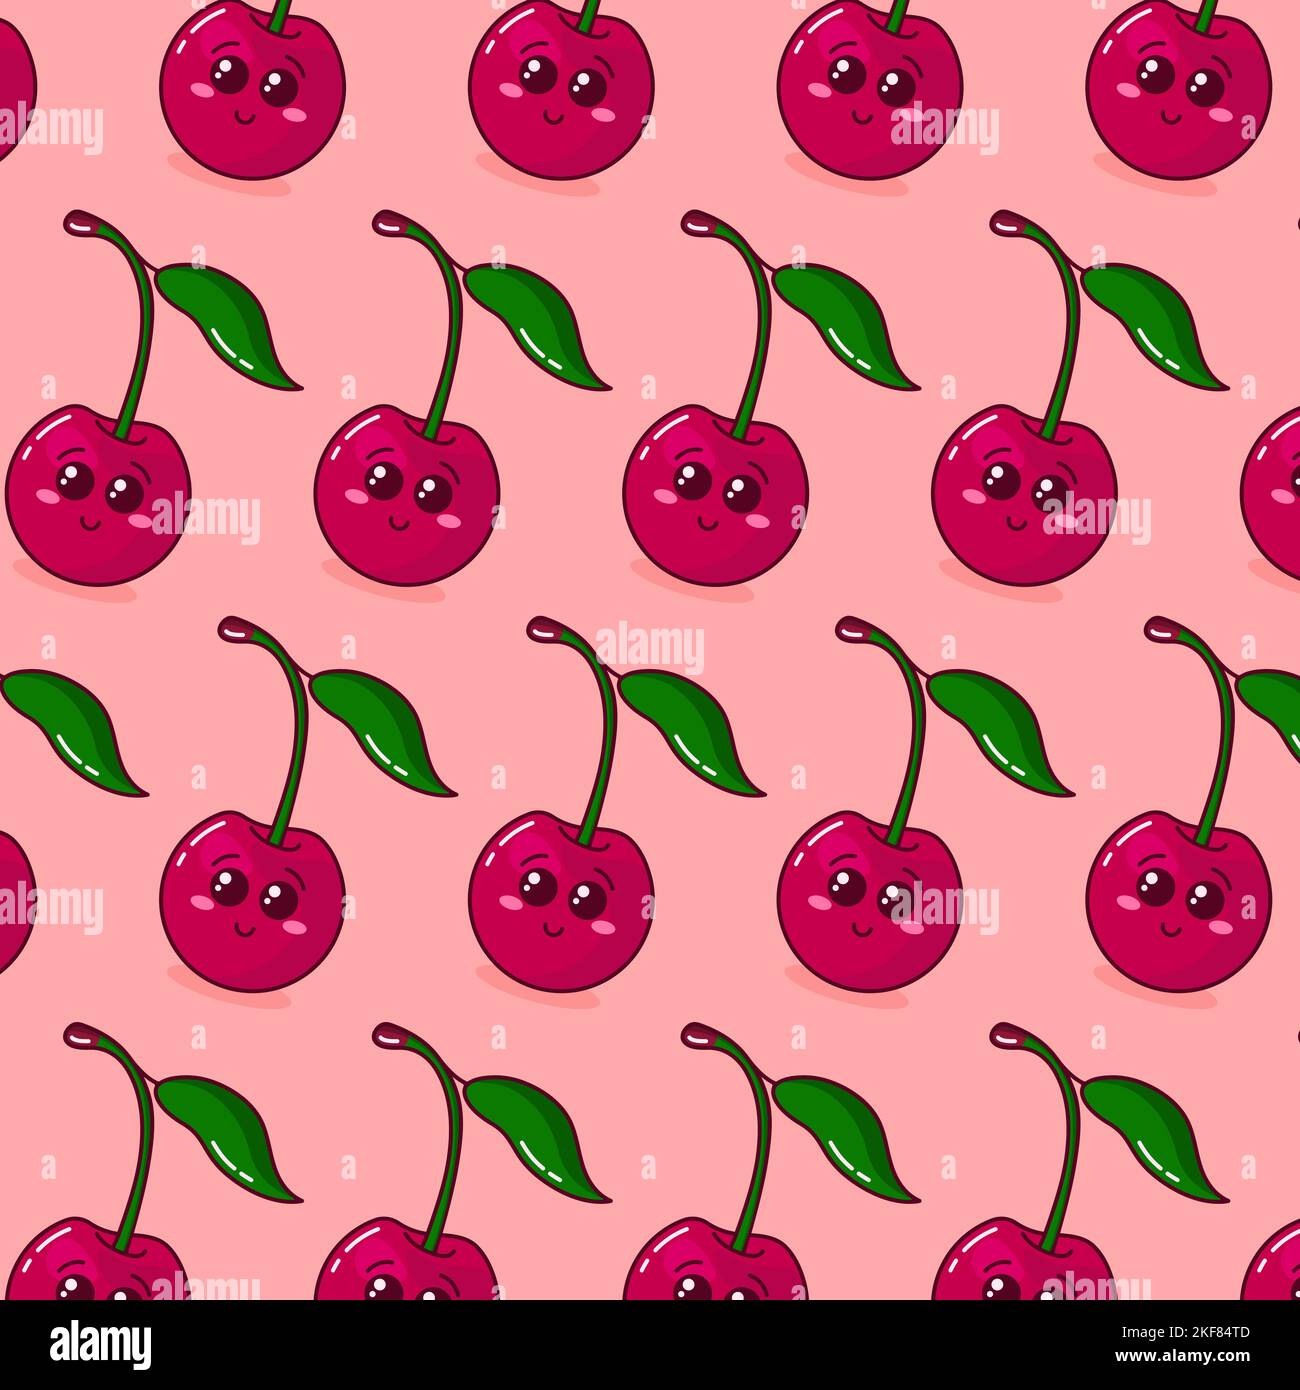 Cute fruit wallpaper Stock Vector Images - Page 2 - Alamy